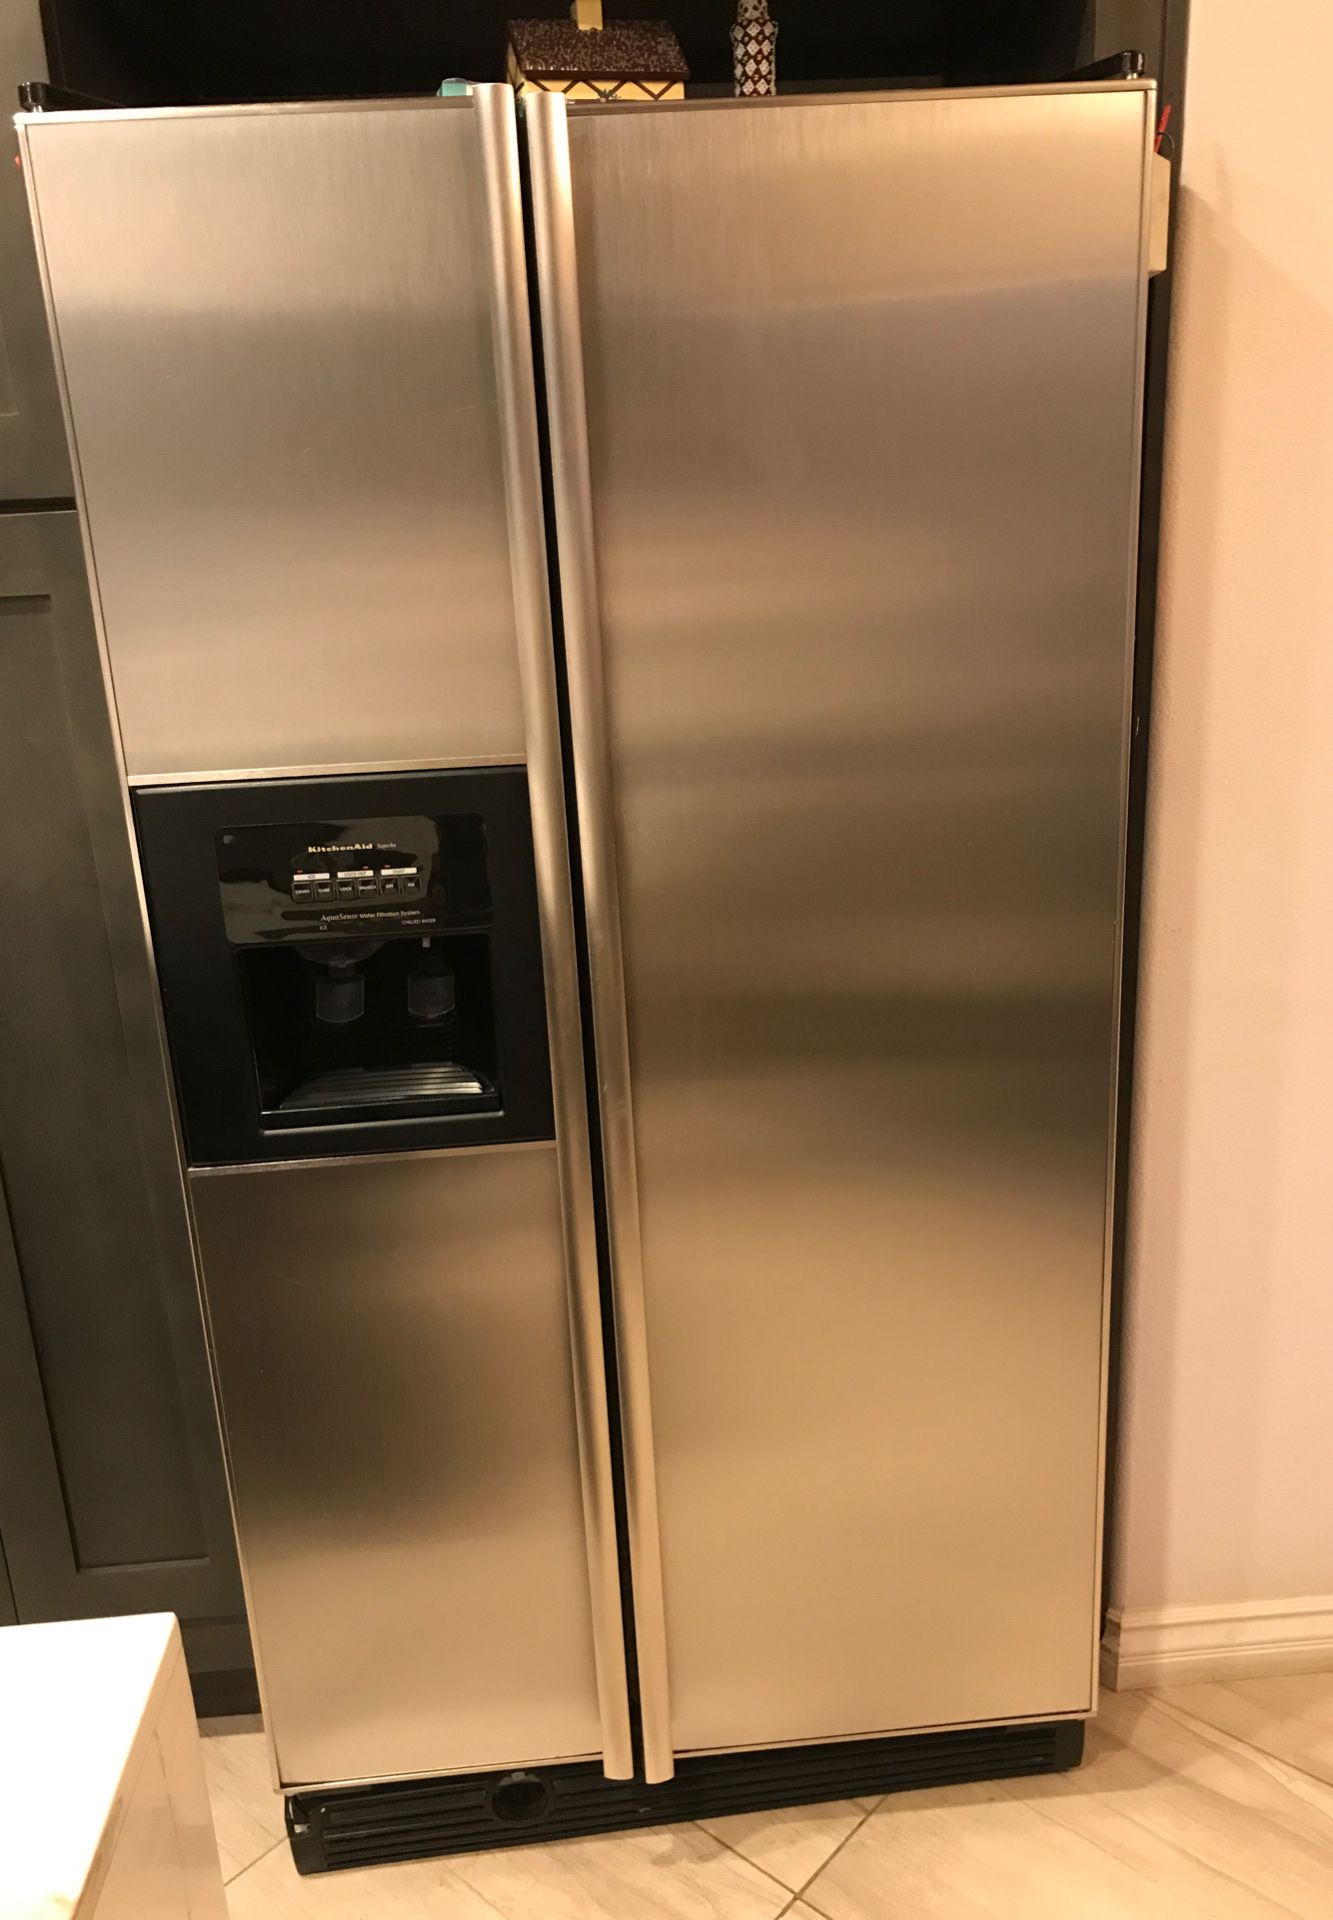 Kitchenaid superba. Side by side stainless steel refrigerator